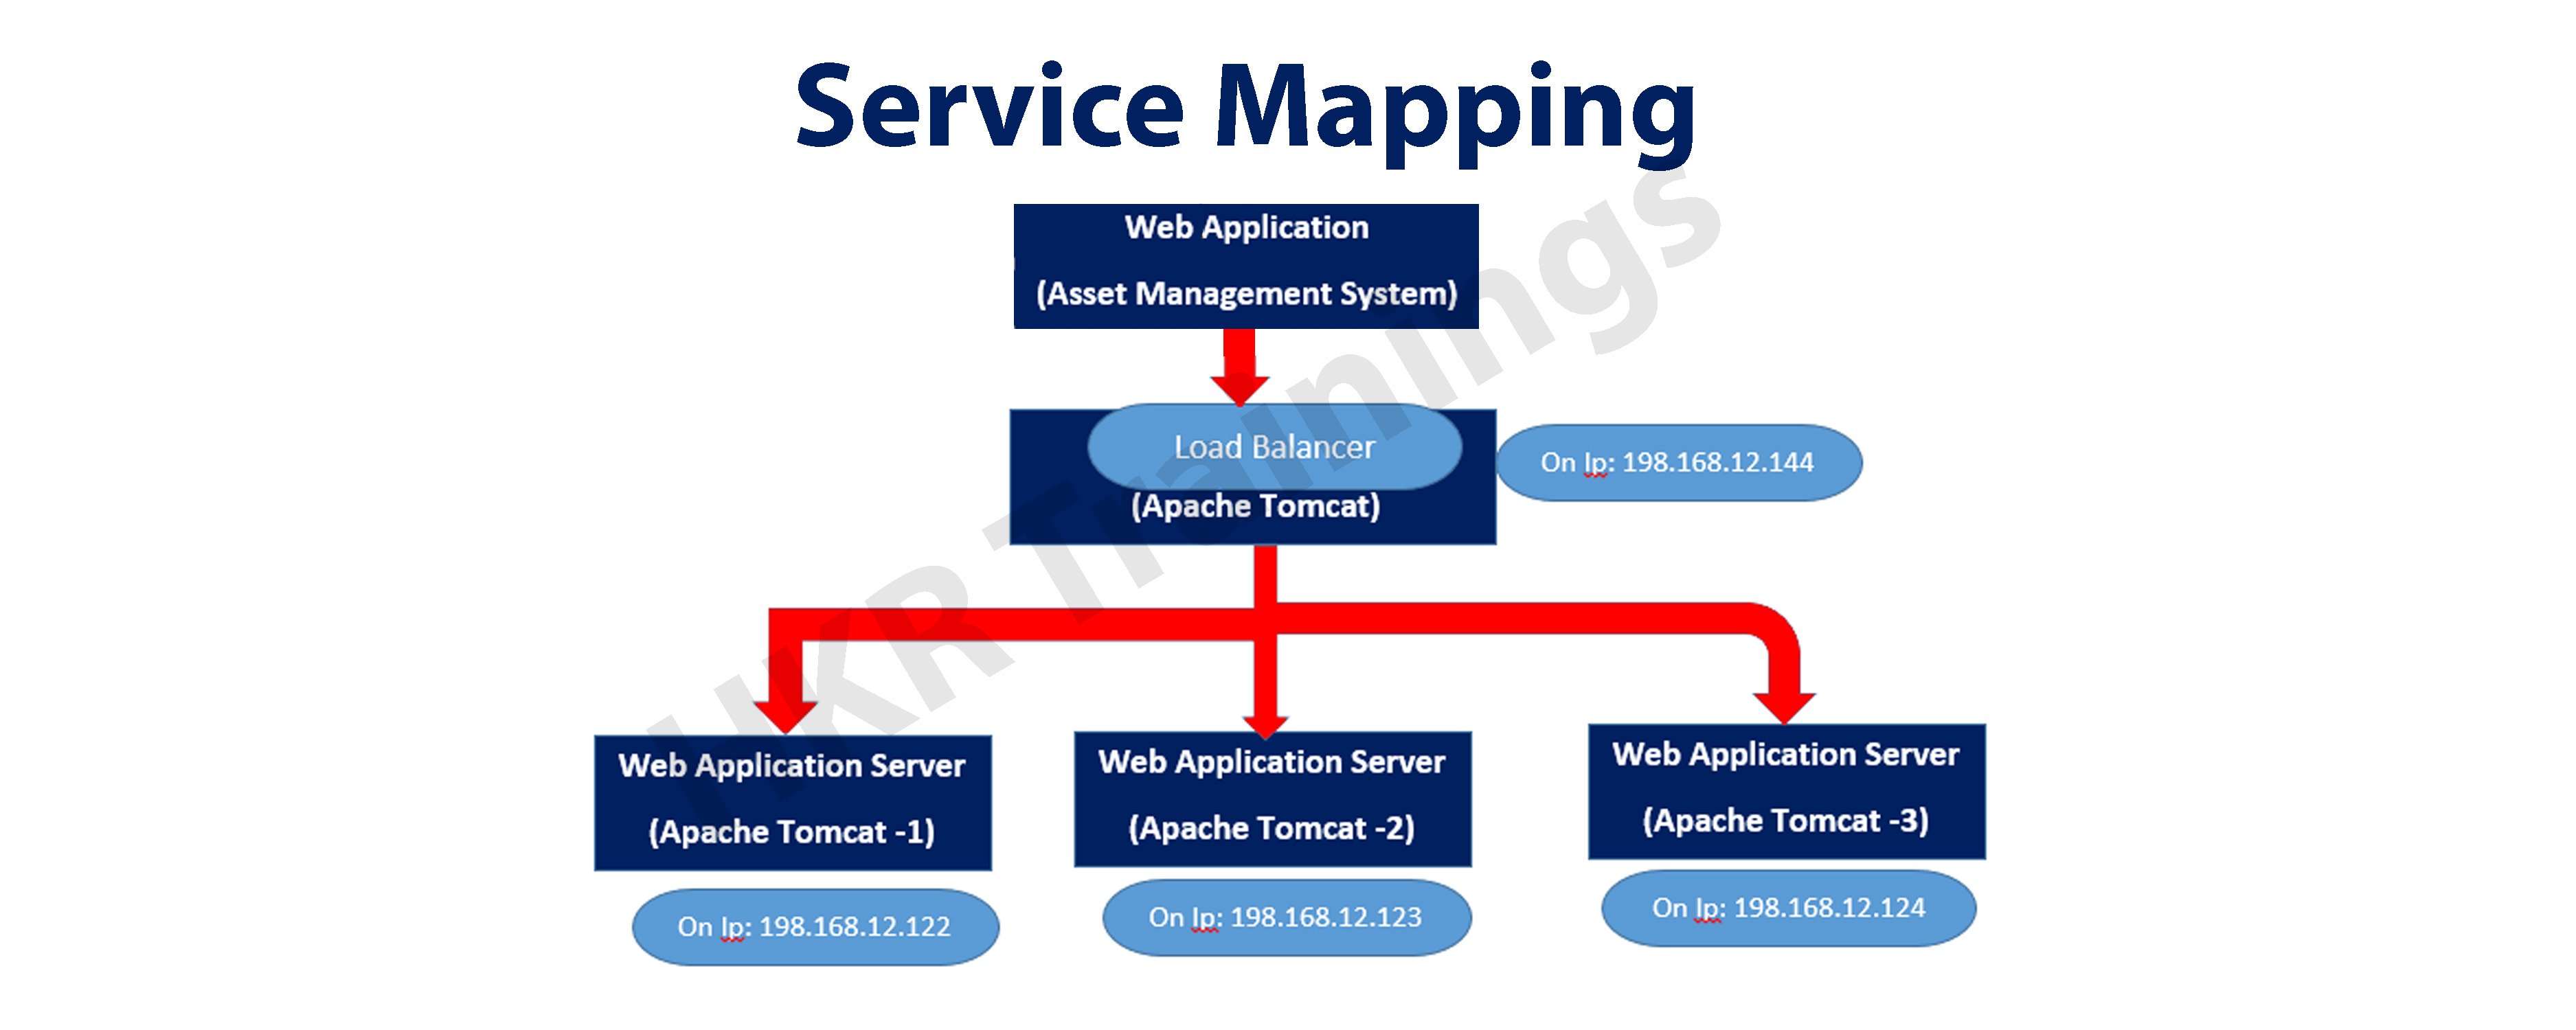 Servicenow Service Mapping